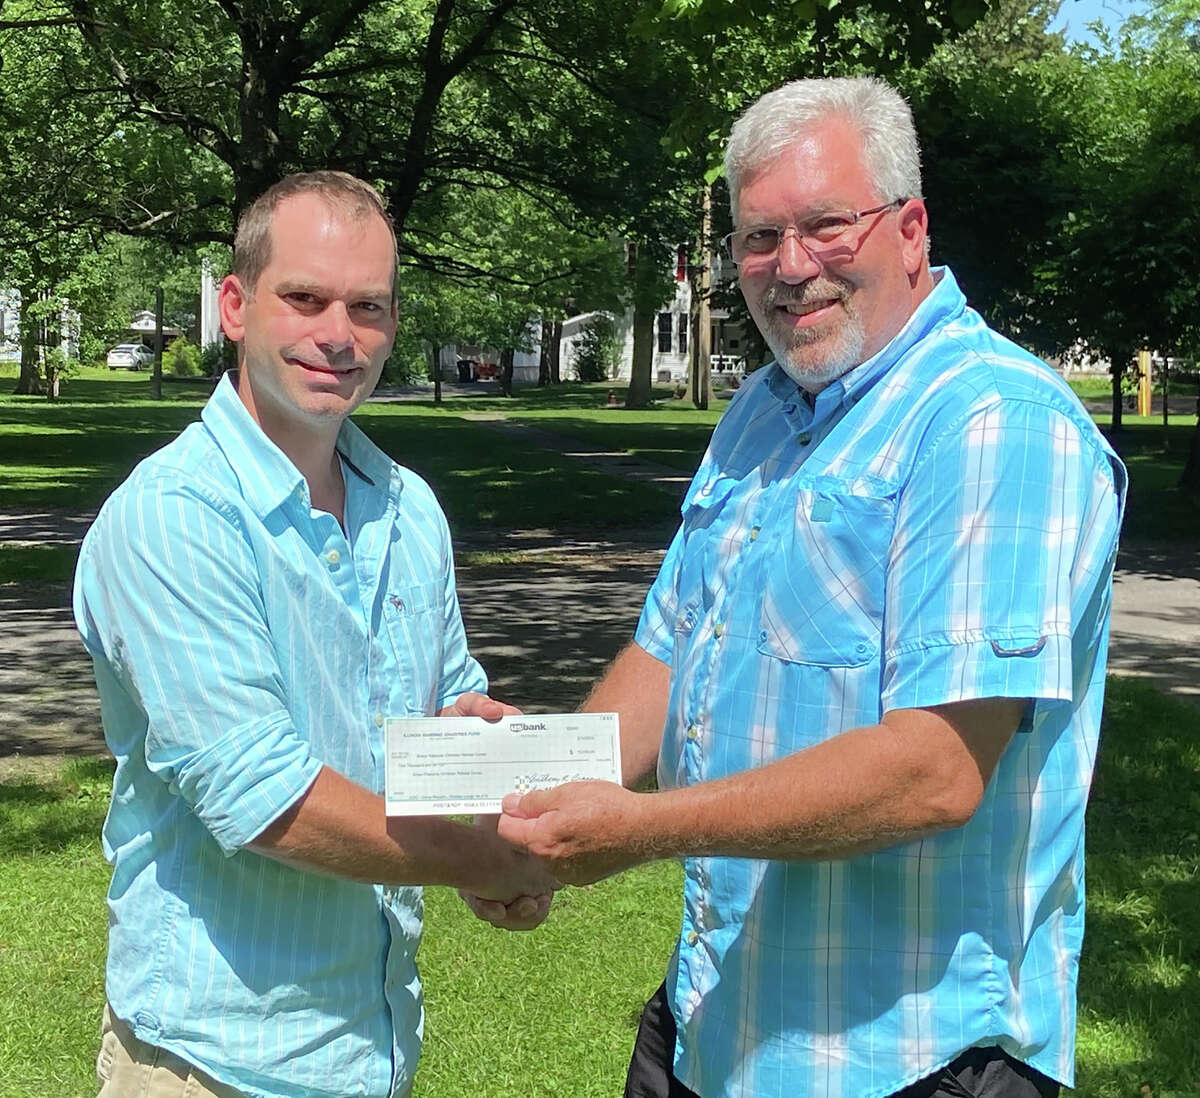 Bobby Carroll (right), secretary of Wadley Lodge No. 616, presents a check to Green Pastures board Chairman Travis Deaver. The check represents grant funding from the Illinois Masonic Children's Assistance Program.